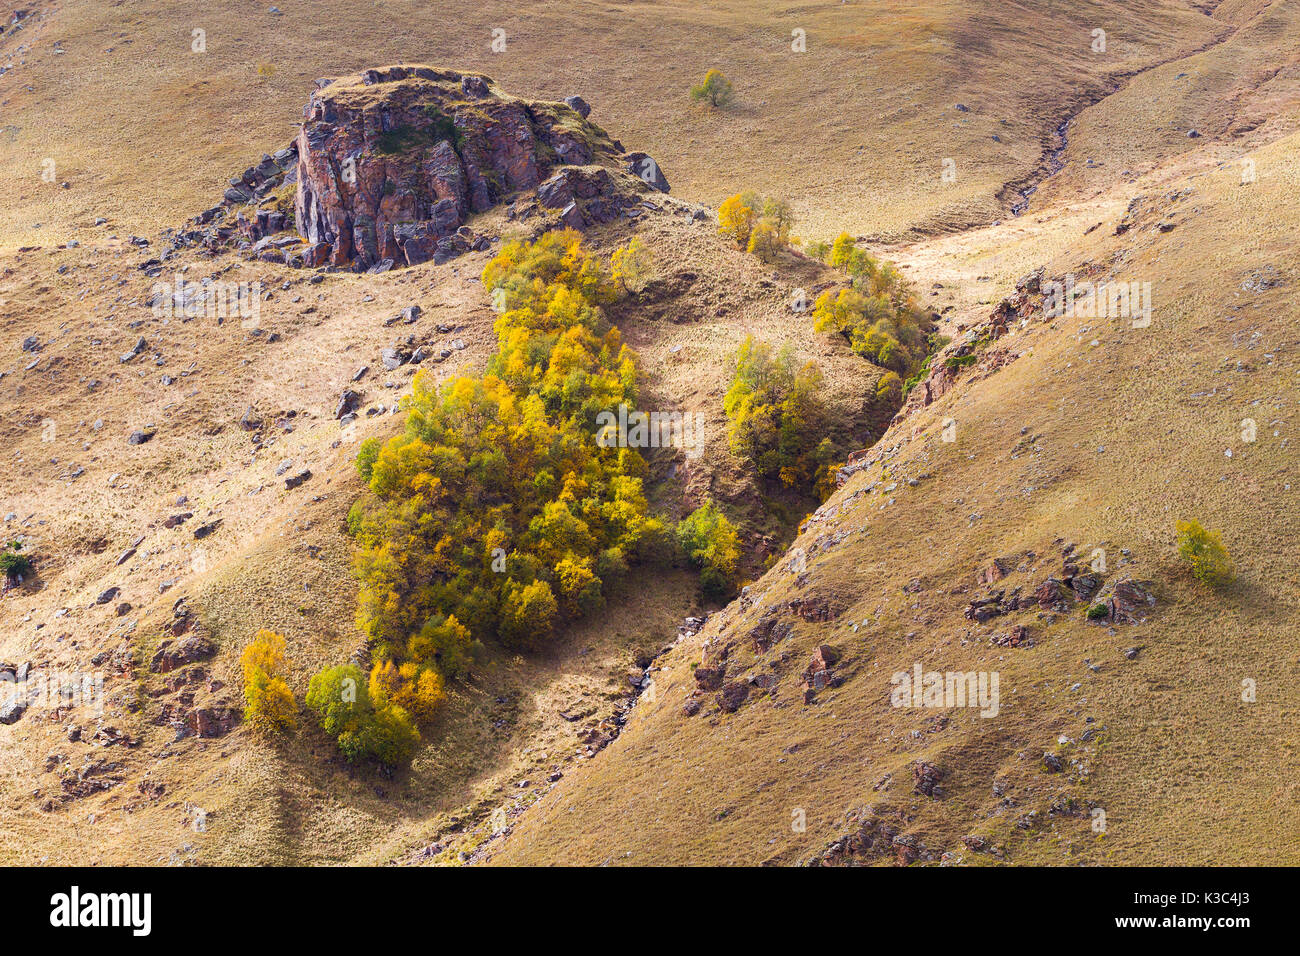 Autumn mountain landscape: hill slopes covered by dry plants and trees with yellow and green foliage and rocks. Stock Photo